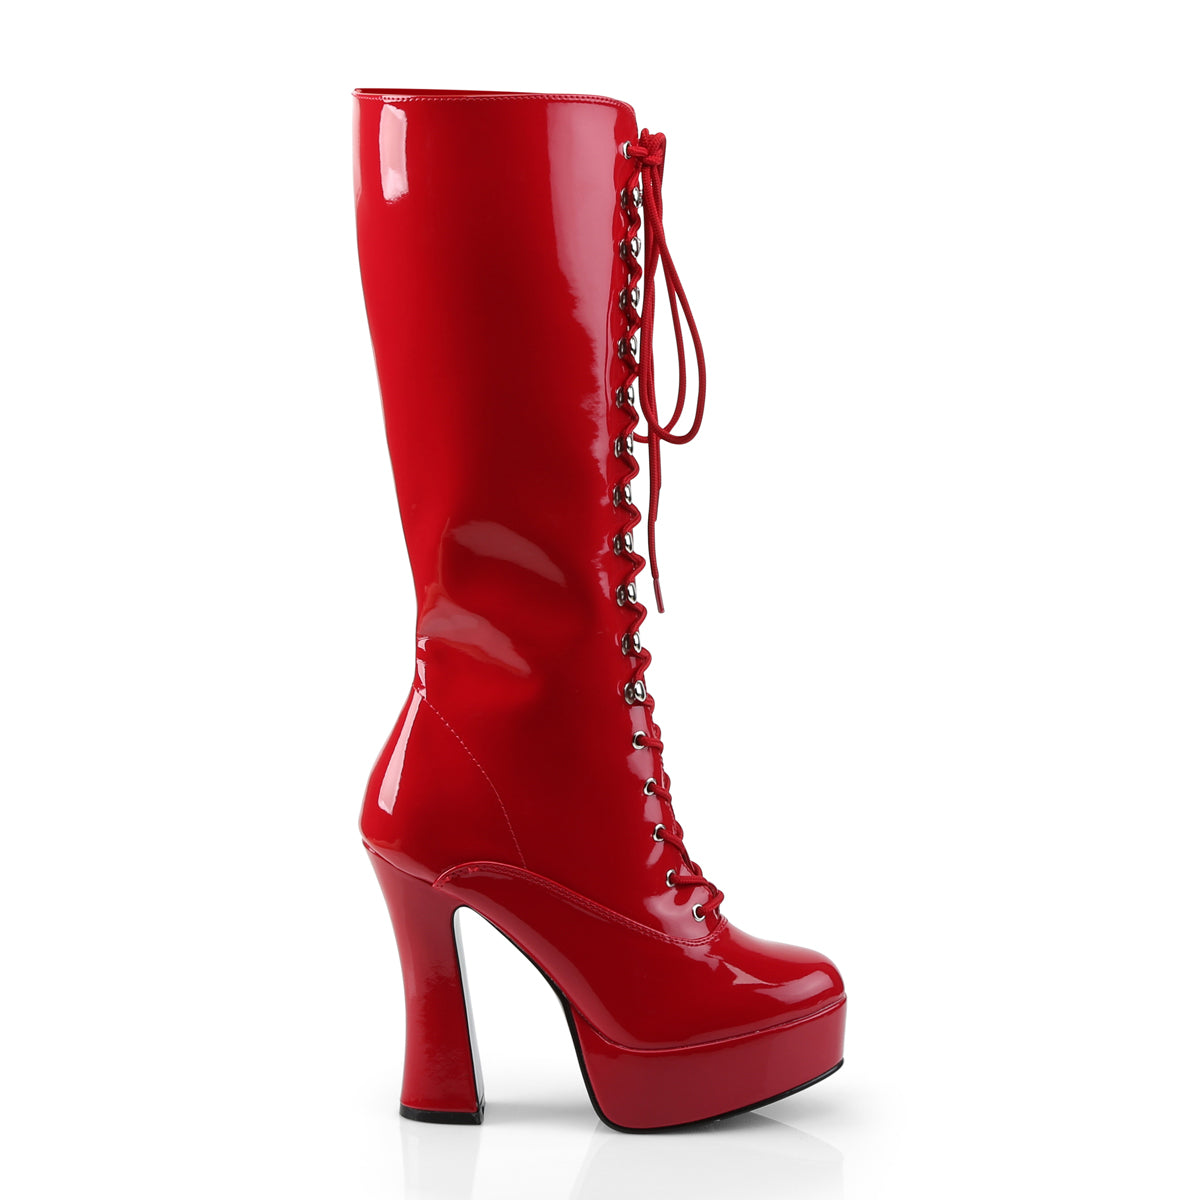 ELECTRA-2020 Pleaser Red Patent Platform Shoes [Kinky Boots]